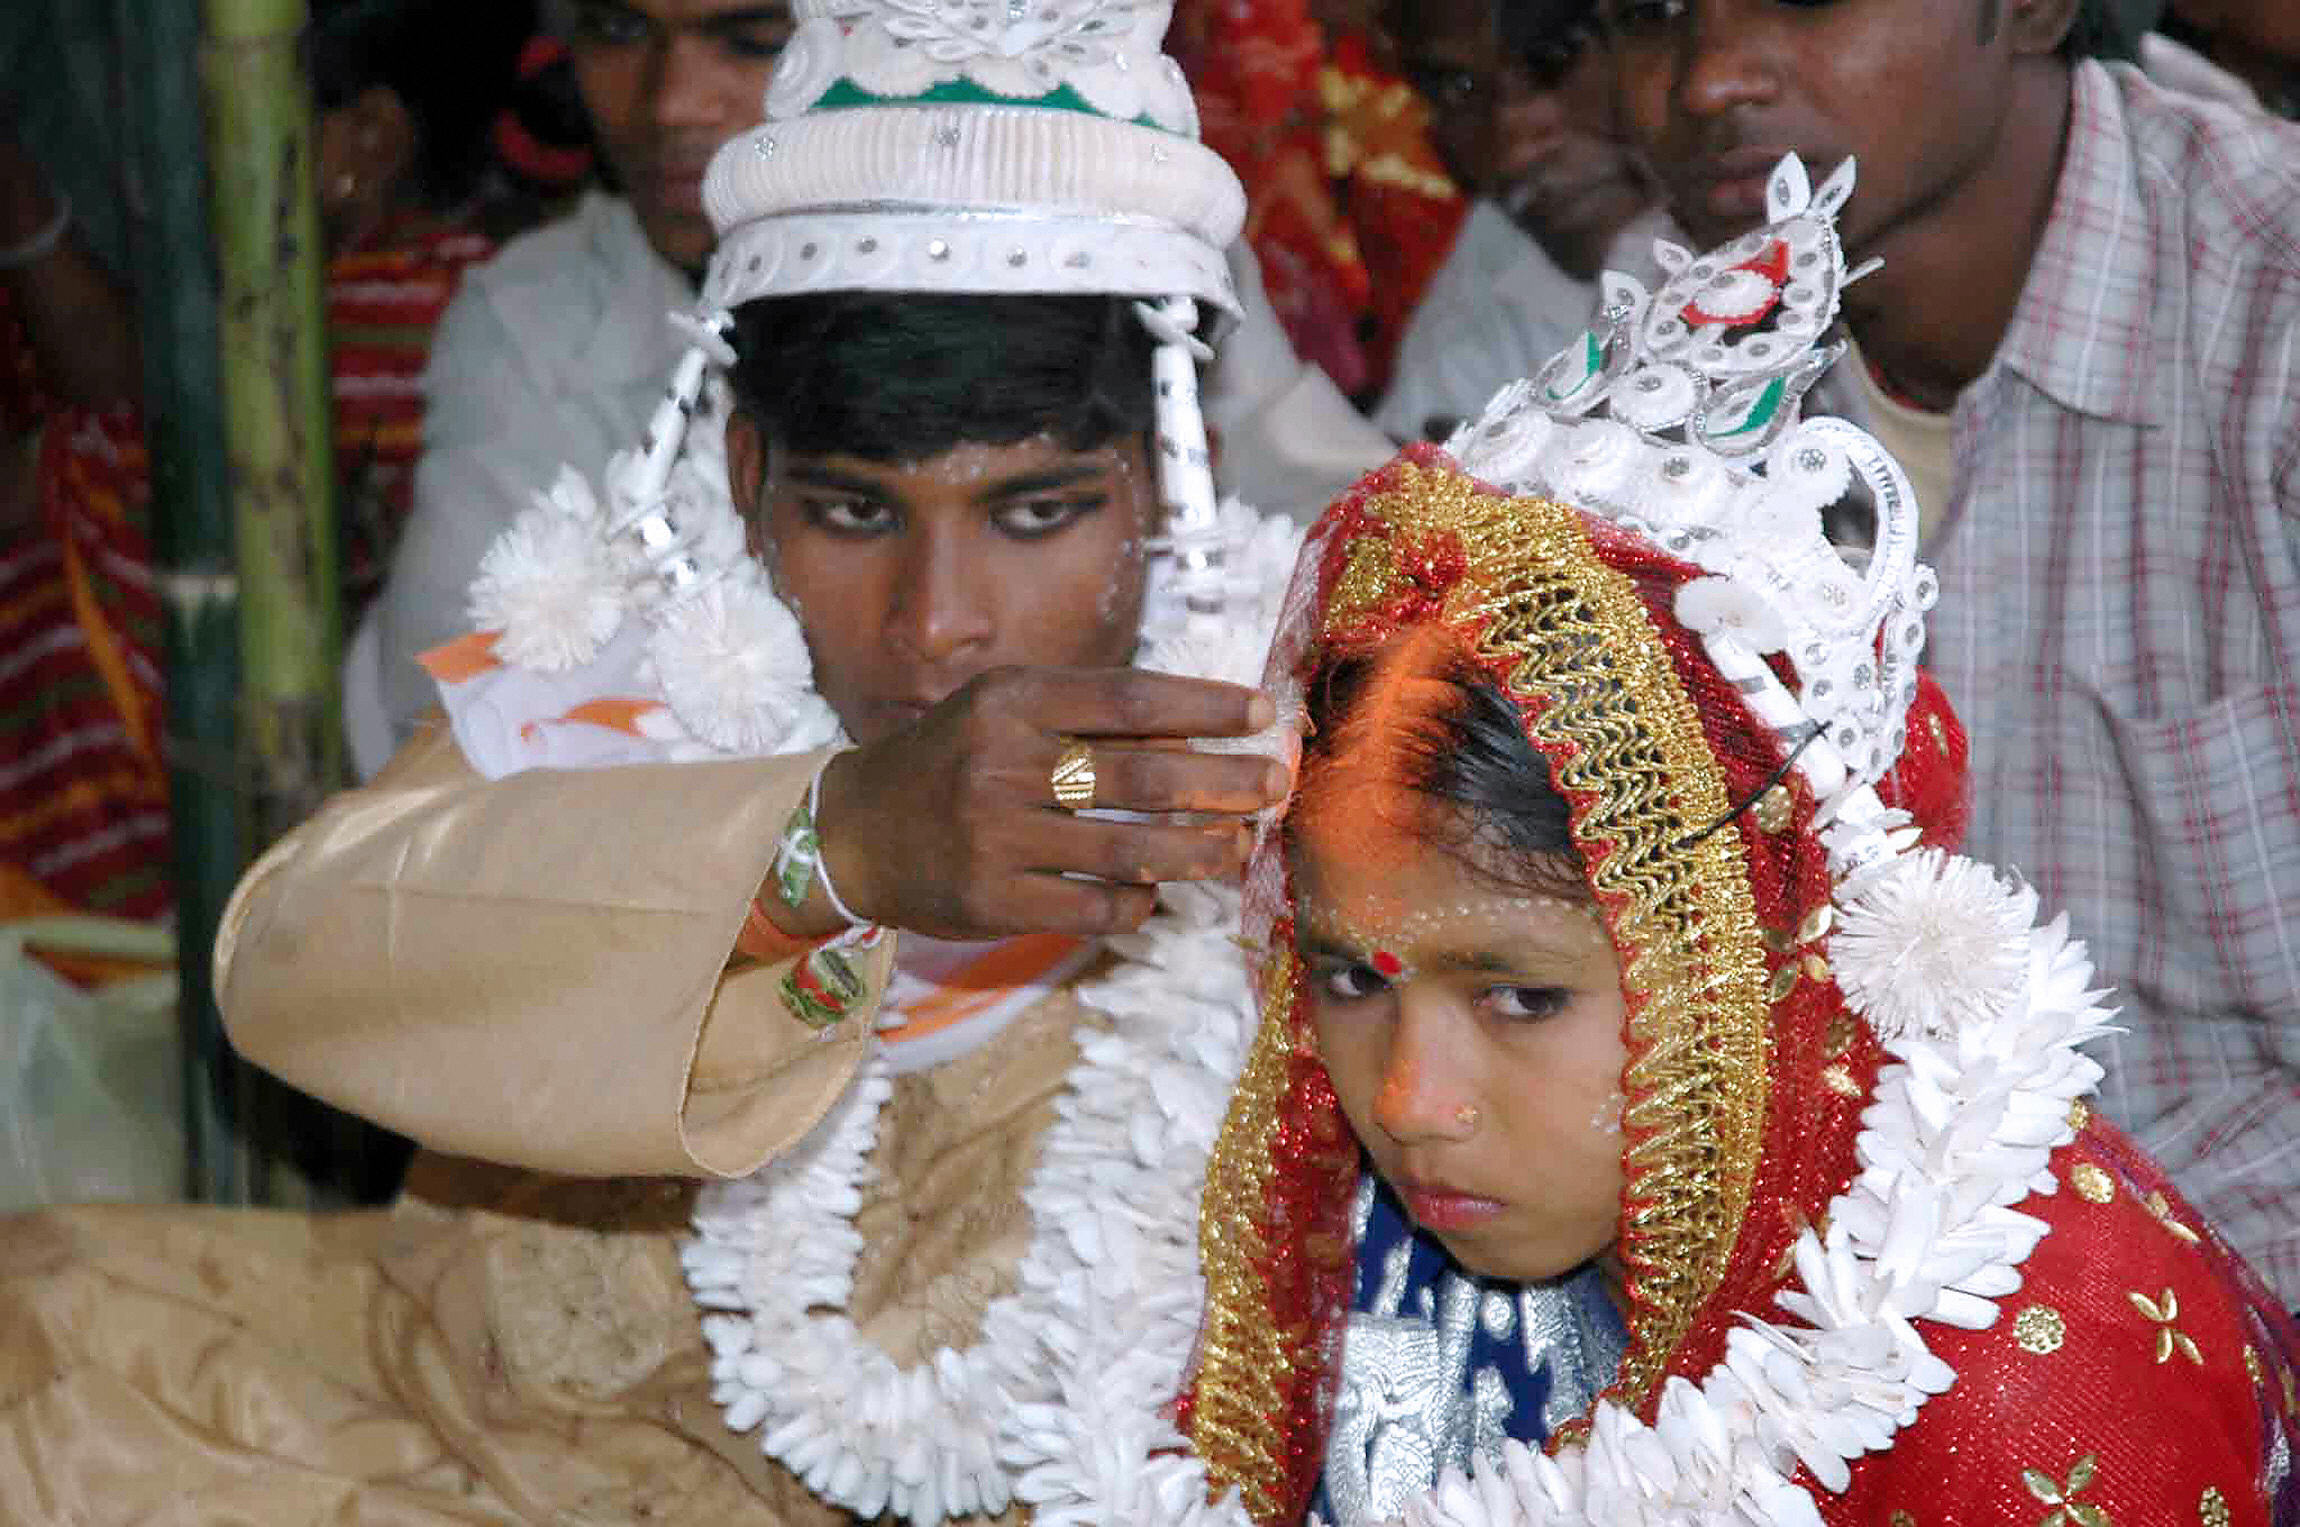 Indian groom puts vermilion on the forehead of his underage bride during a mass marriage in Malda, India 02 March 2006. (STRDEL/AFP/Getty Images)